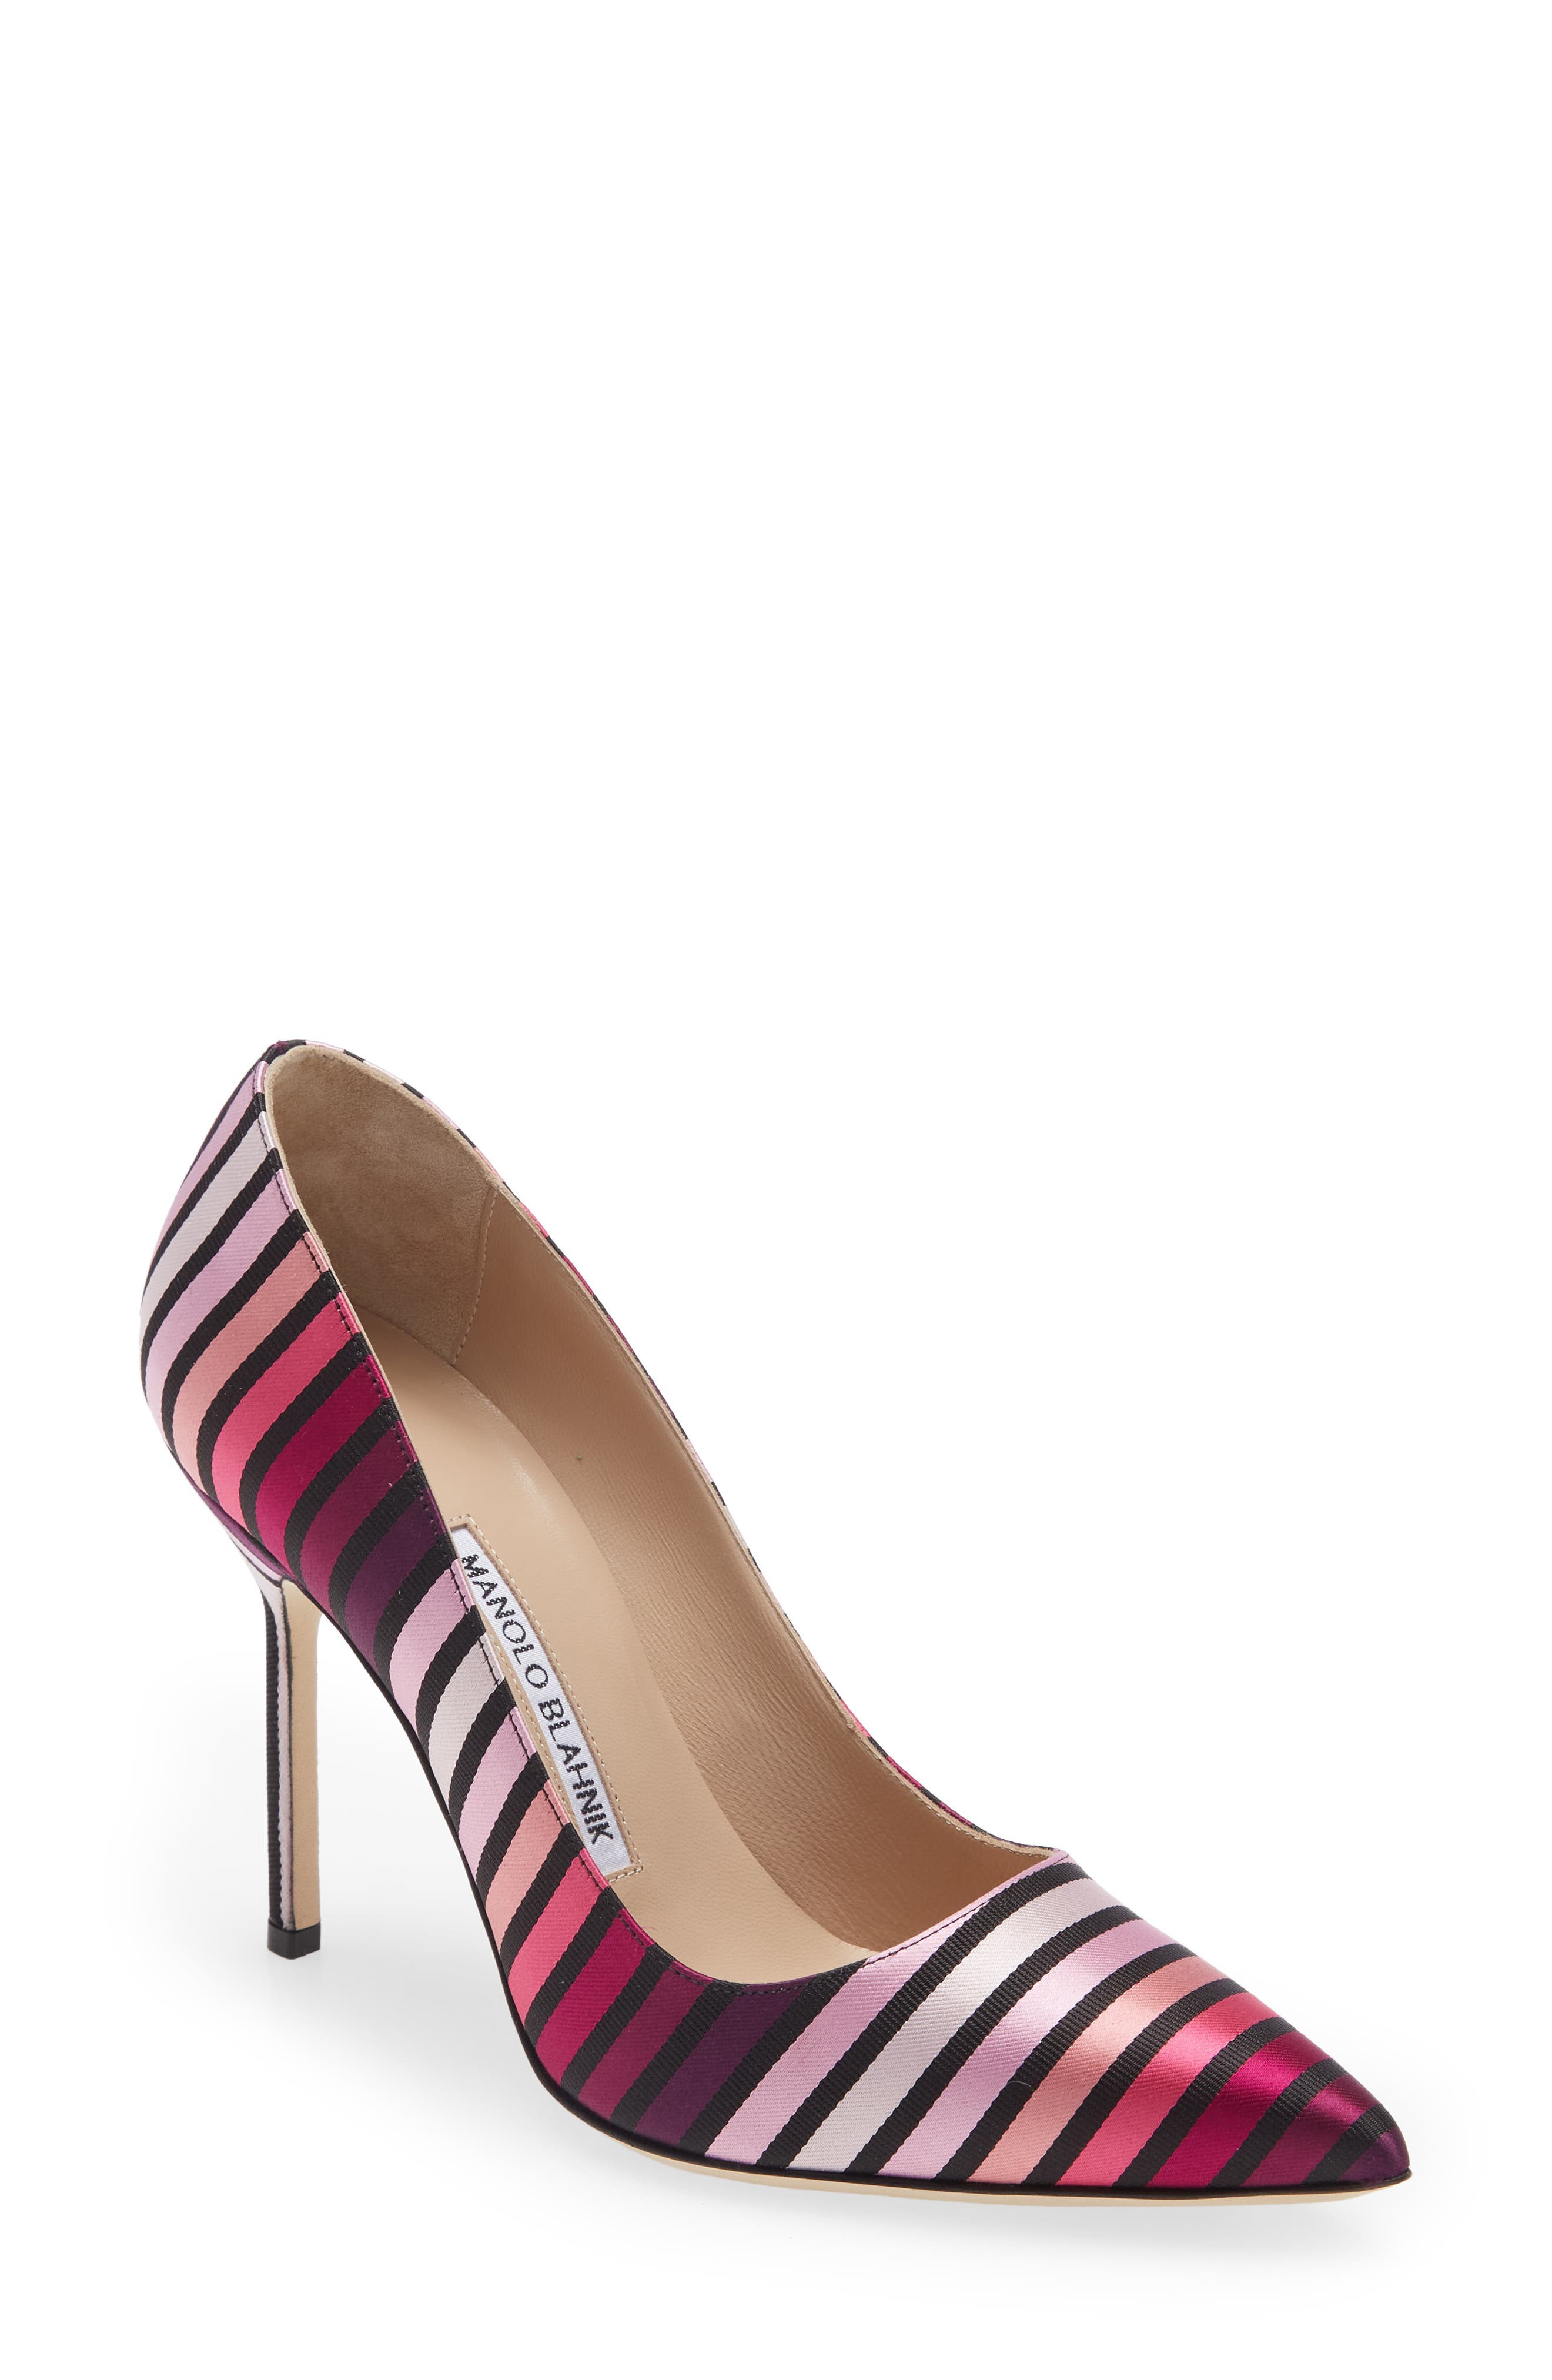 Manolo Blahnik BB Pointed Toe Pump in Multicolor at Nordstrom, Size 6Us